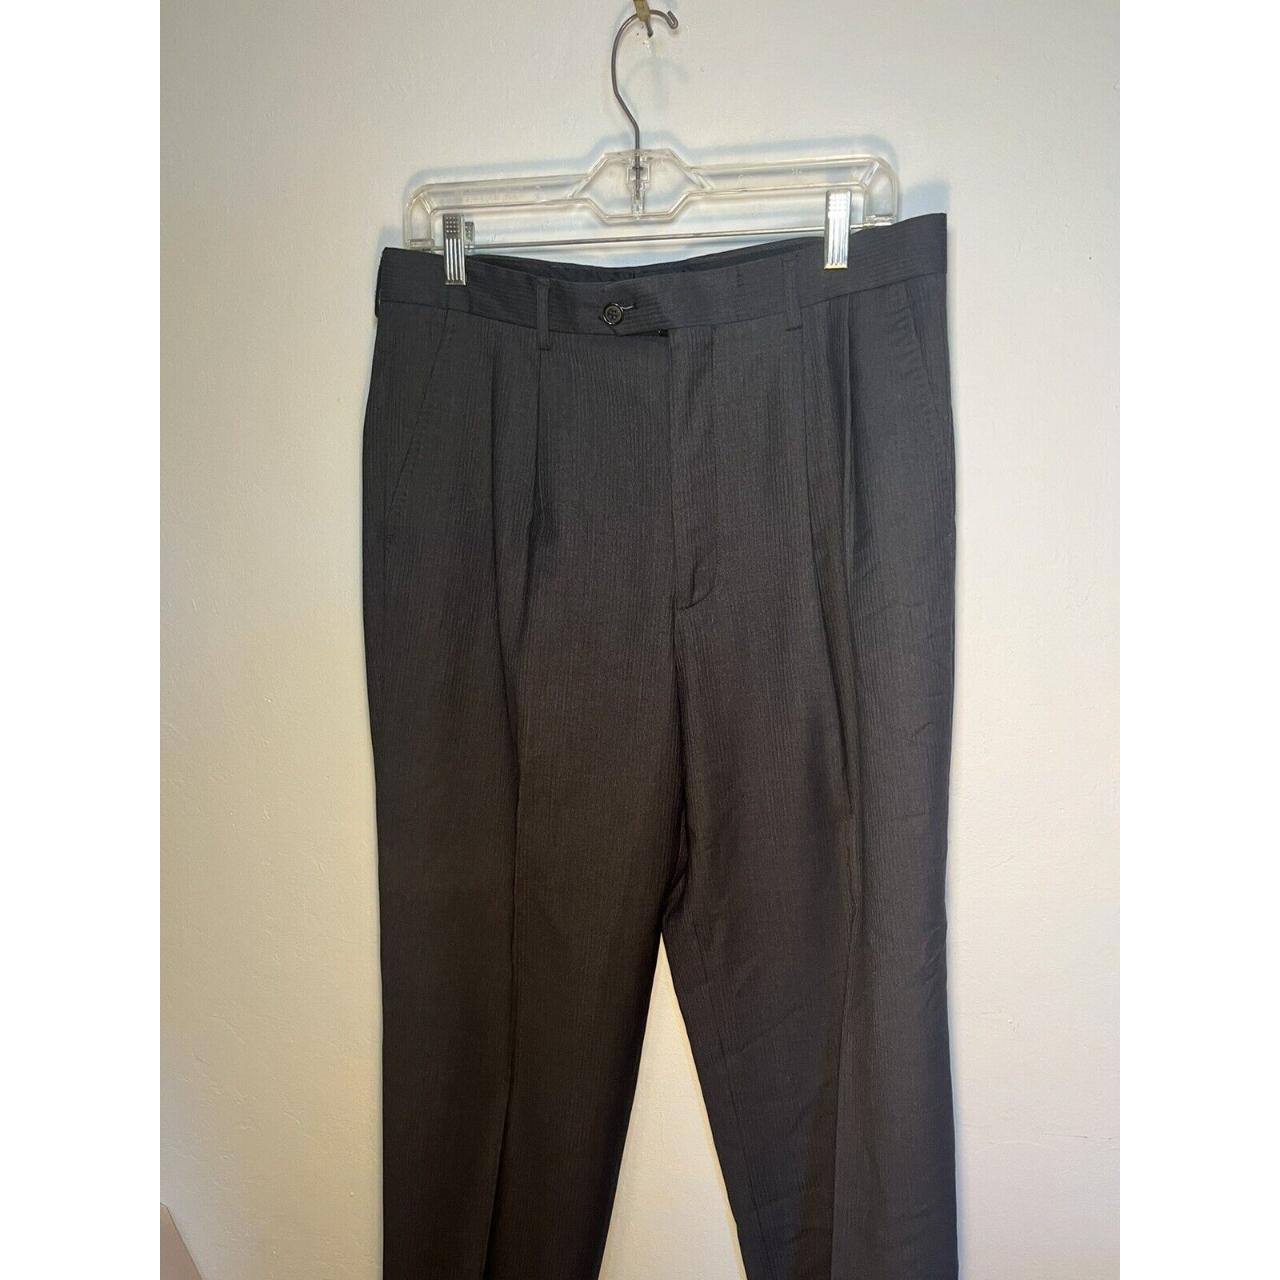 Editions Milano Men's Grey and Black Trousers